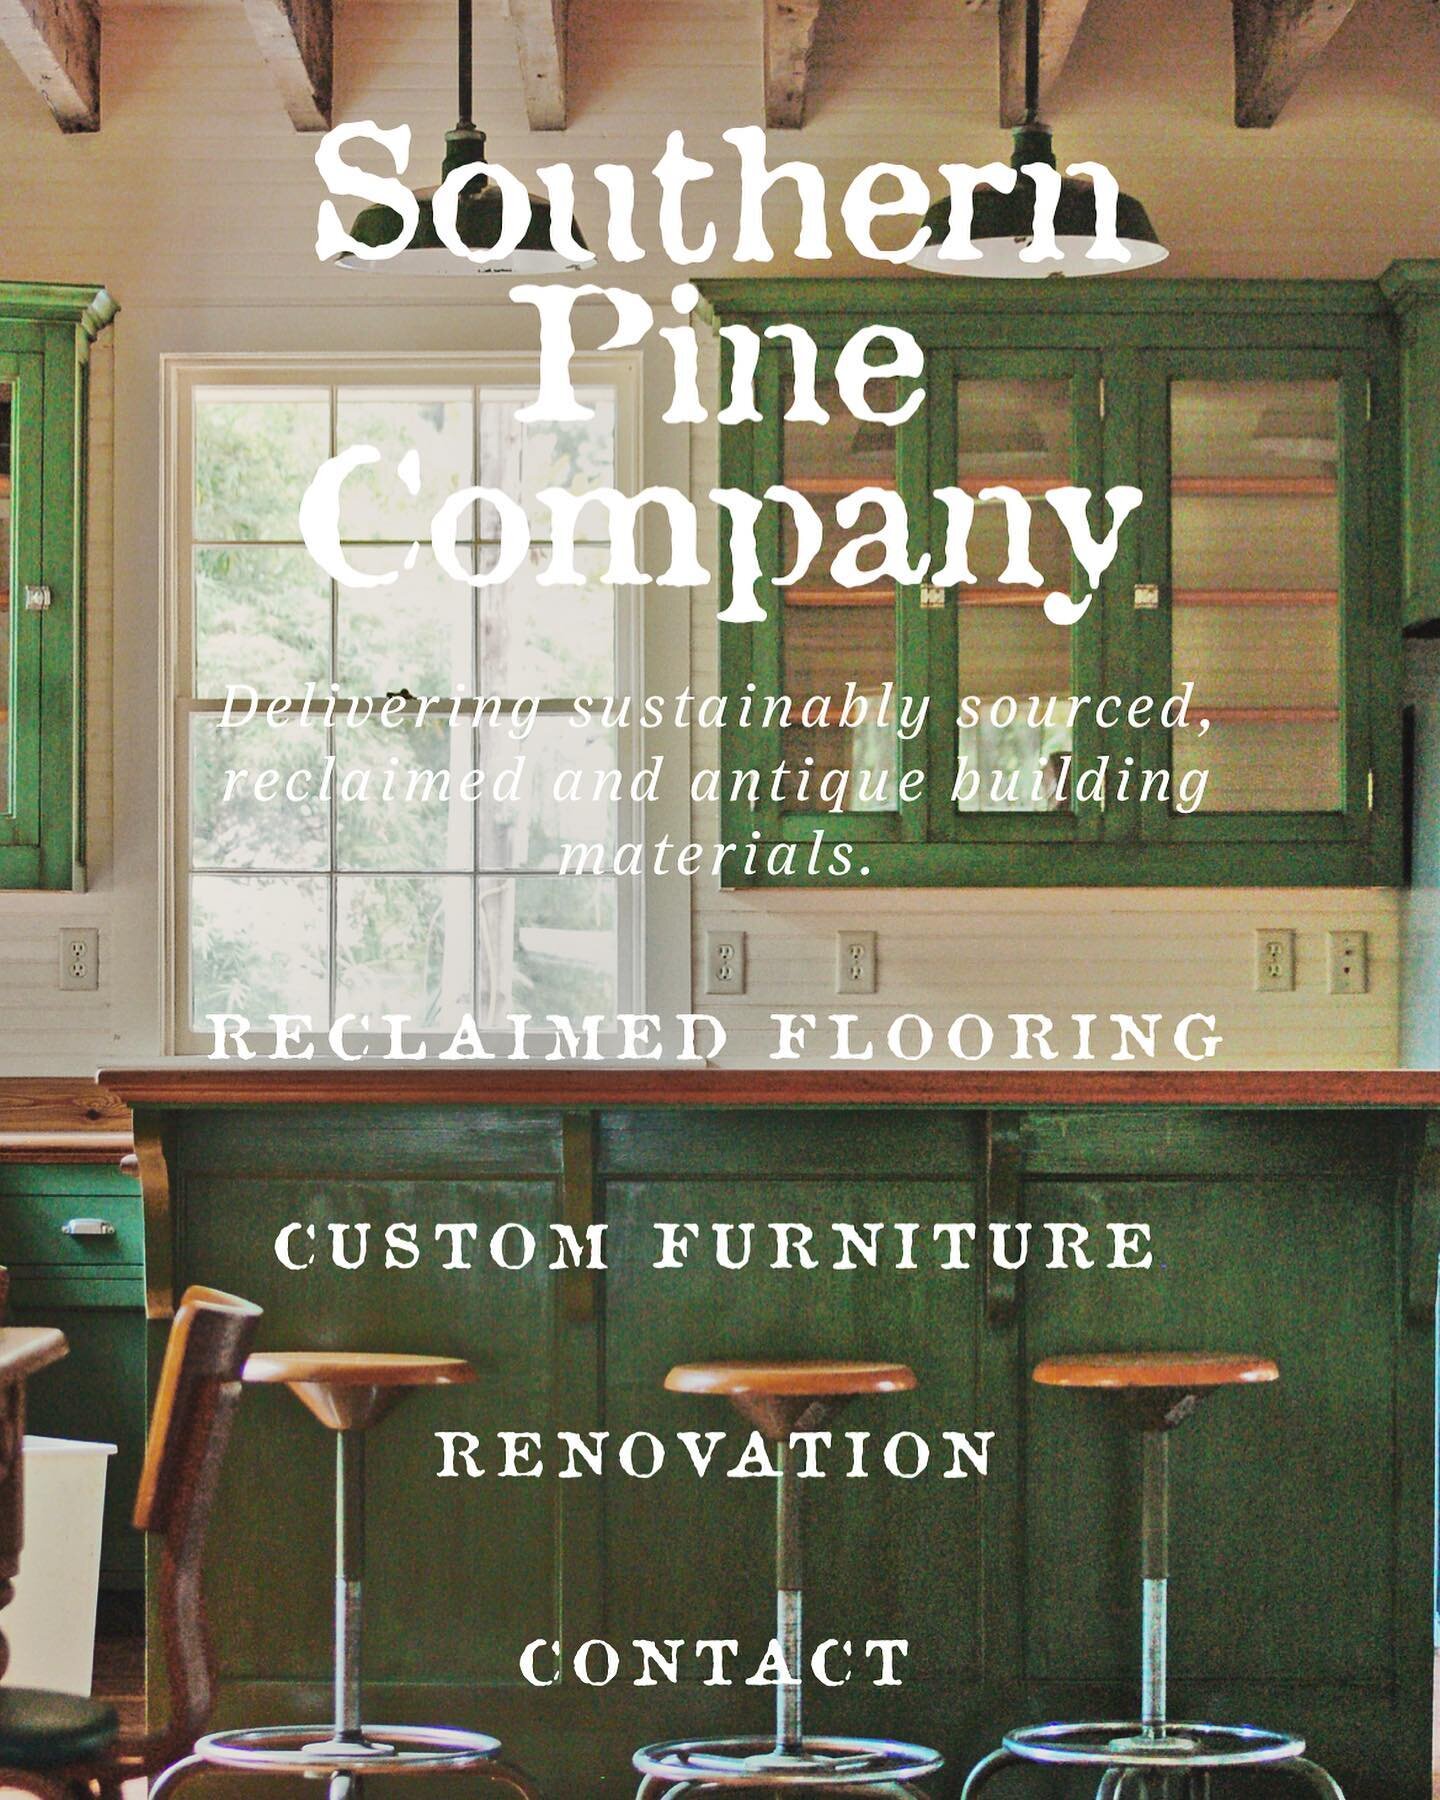 Redesigned our website! Browse with the link in bio. 

#southernpine #southerpinecompany #repurposed #customfurniture #reclaimedwood #preservation